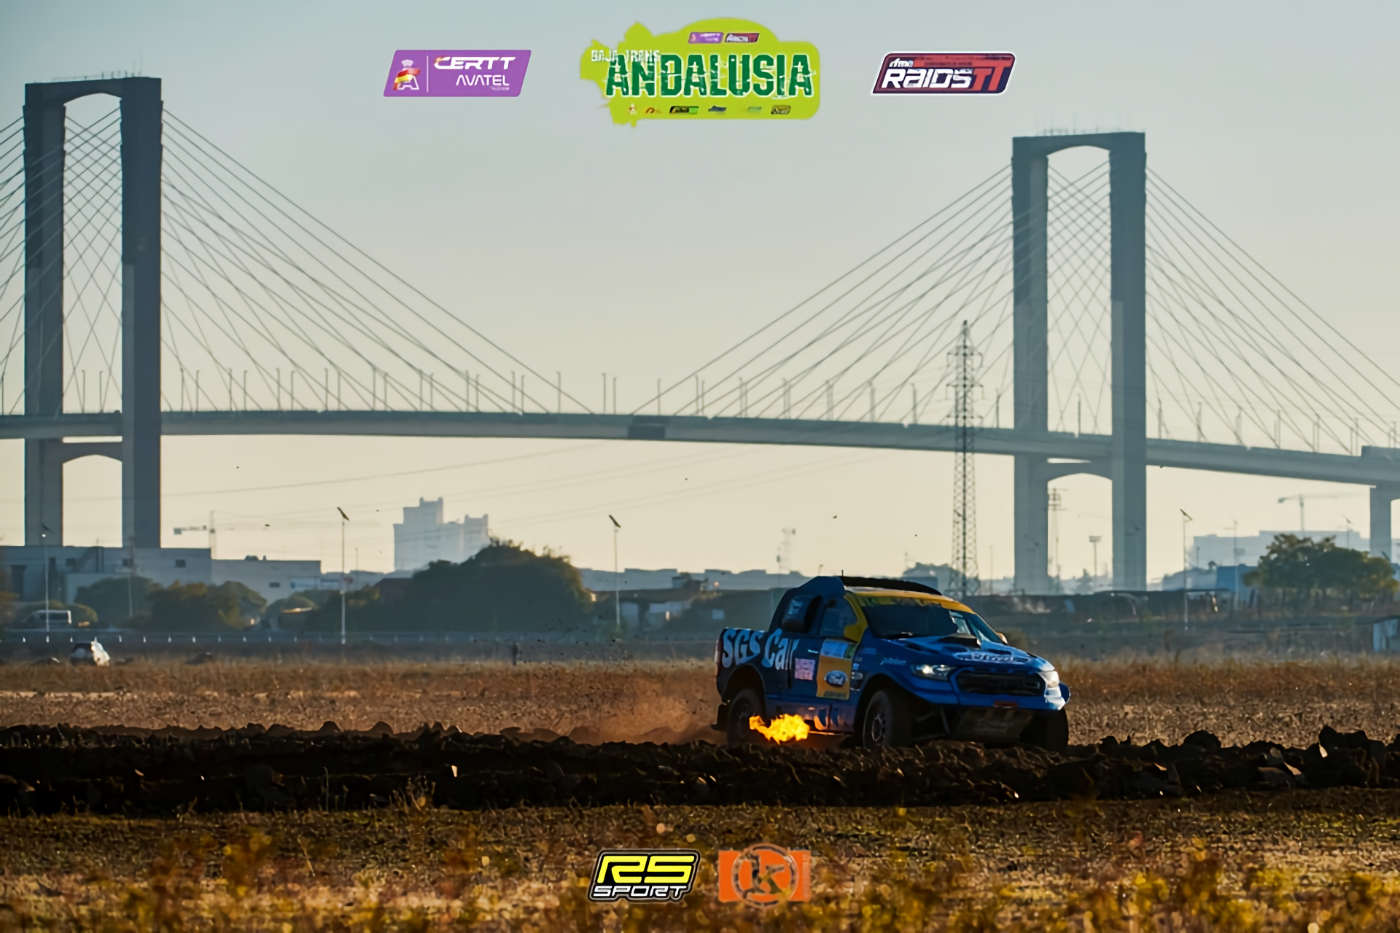 Sevilla Rallye Raid 2022: The final race of the Spanish Championship was cancelled.